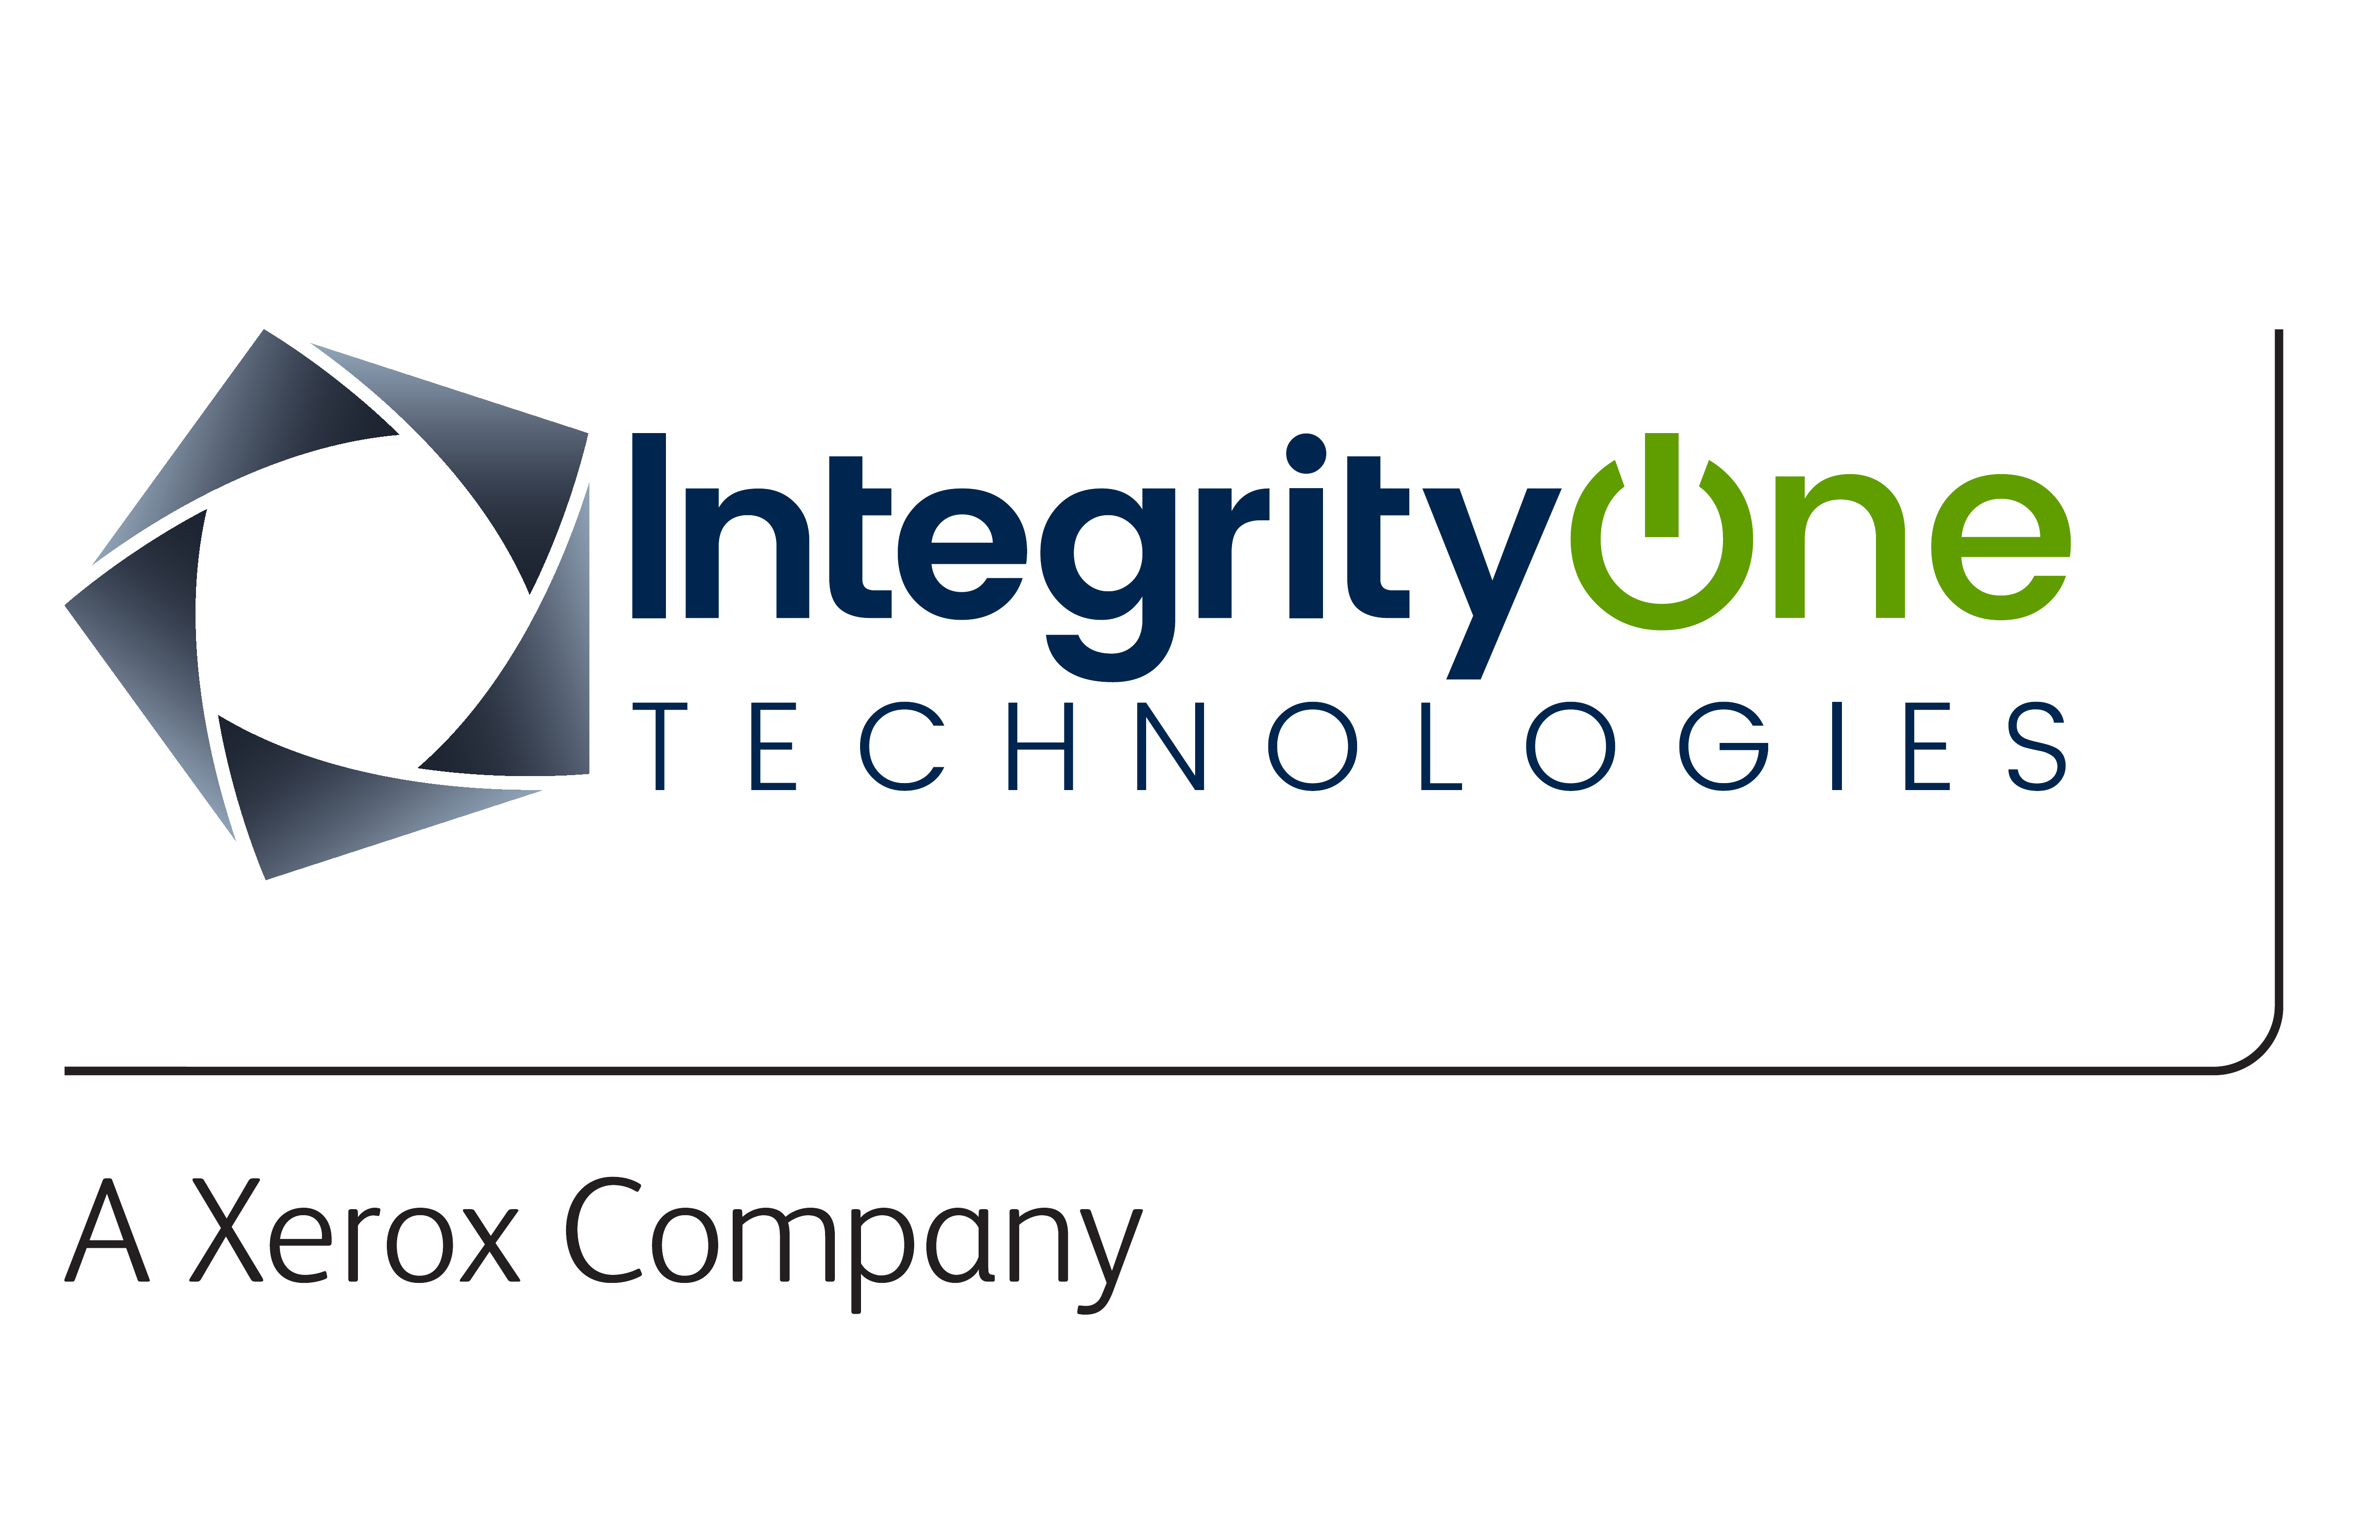 Integrity One Technologies